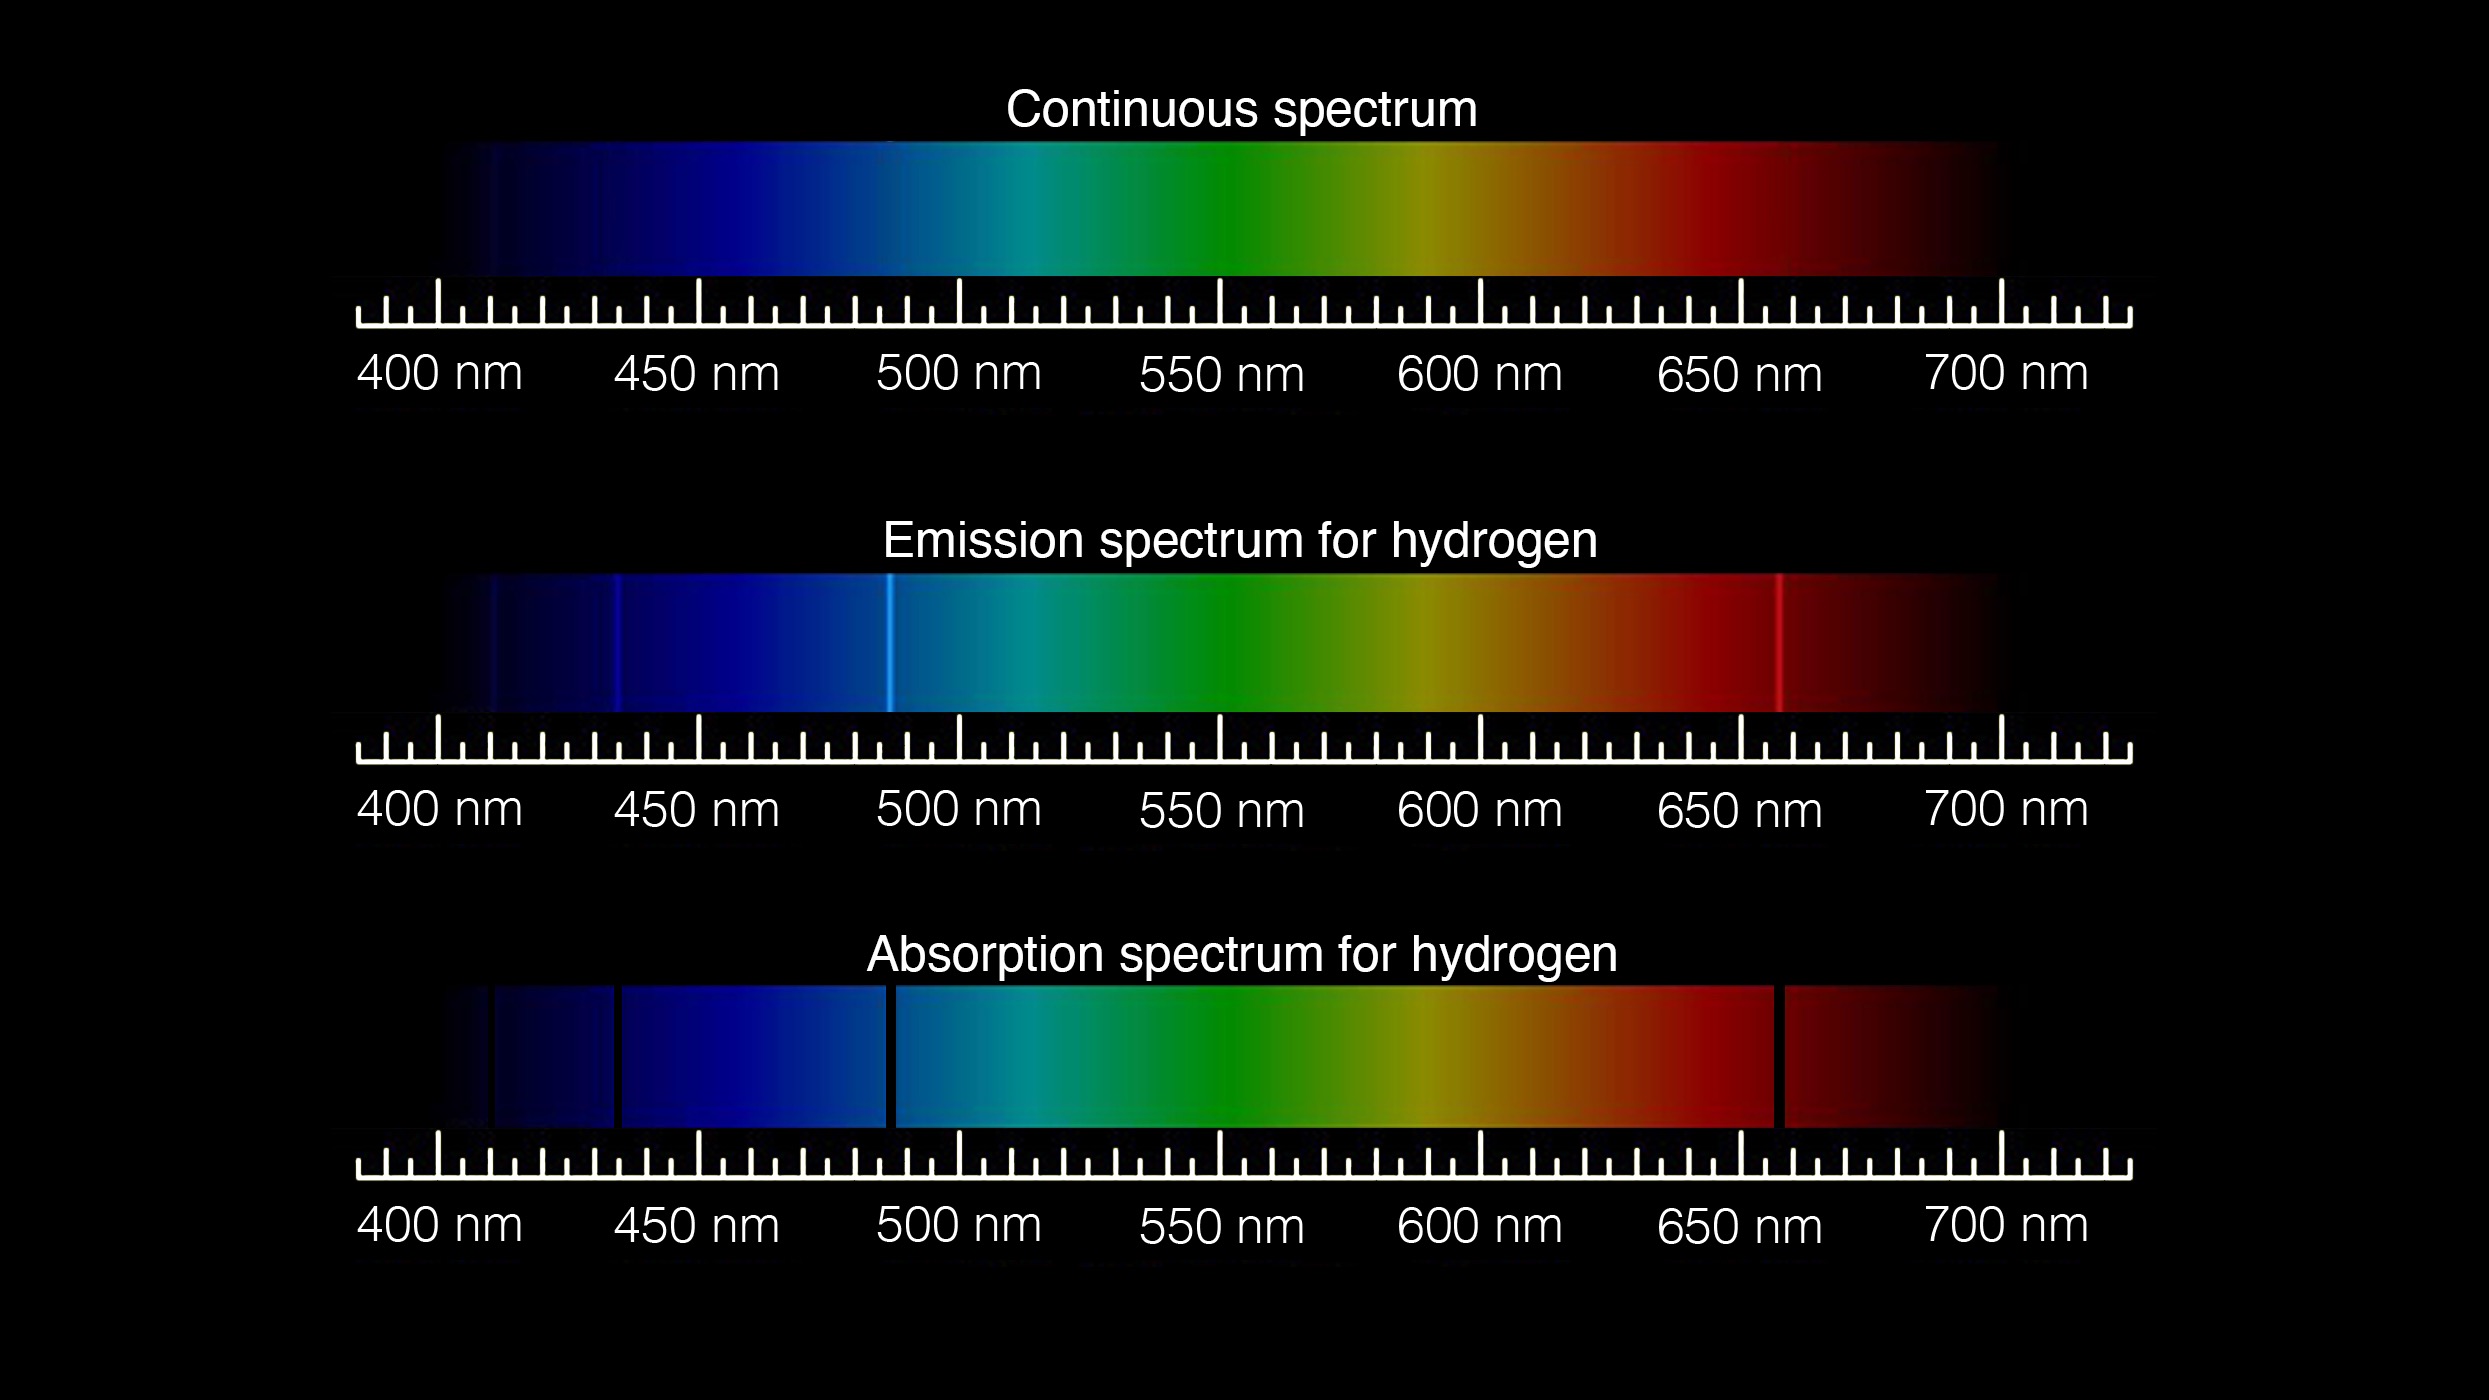 A comparison of three visible light (ROYGBIV) spectra. The first is labeled Continuous spectrum and has no lines. The second is labeled Emission spectrum for hydrogen and has bright lines at about 410 nm, 435 nm, 485 nm, and 655 nm. The third is labeled Absorpotion spectrum for hydrogen and shows dark lines at the same locations.